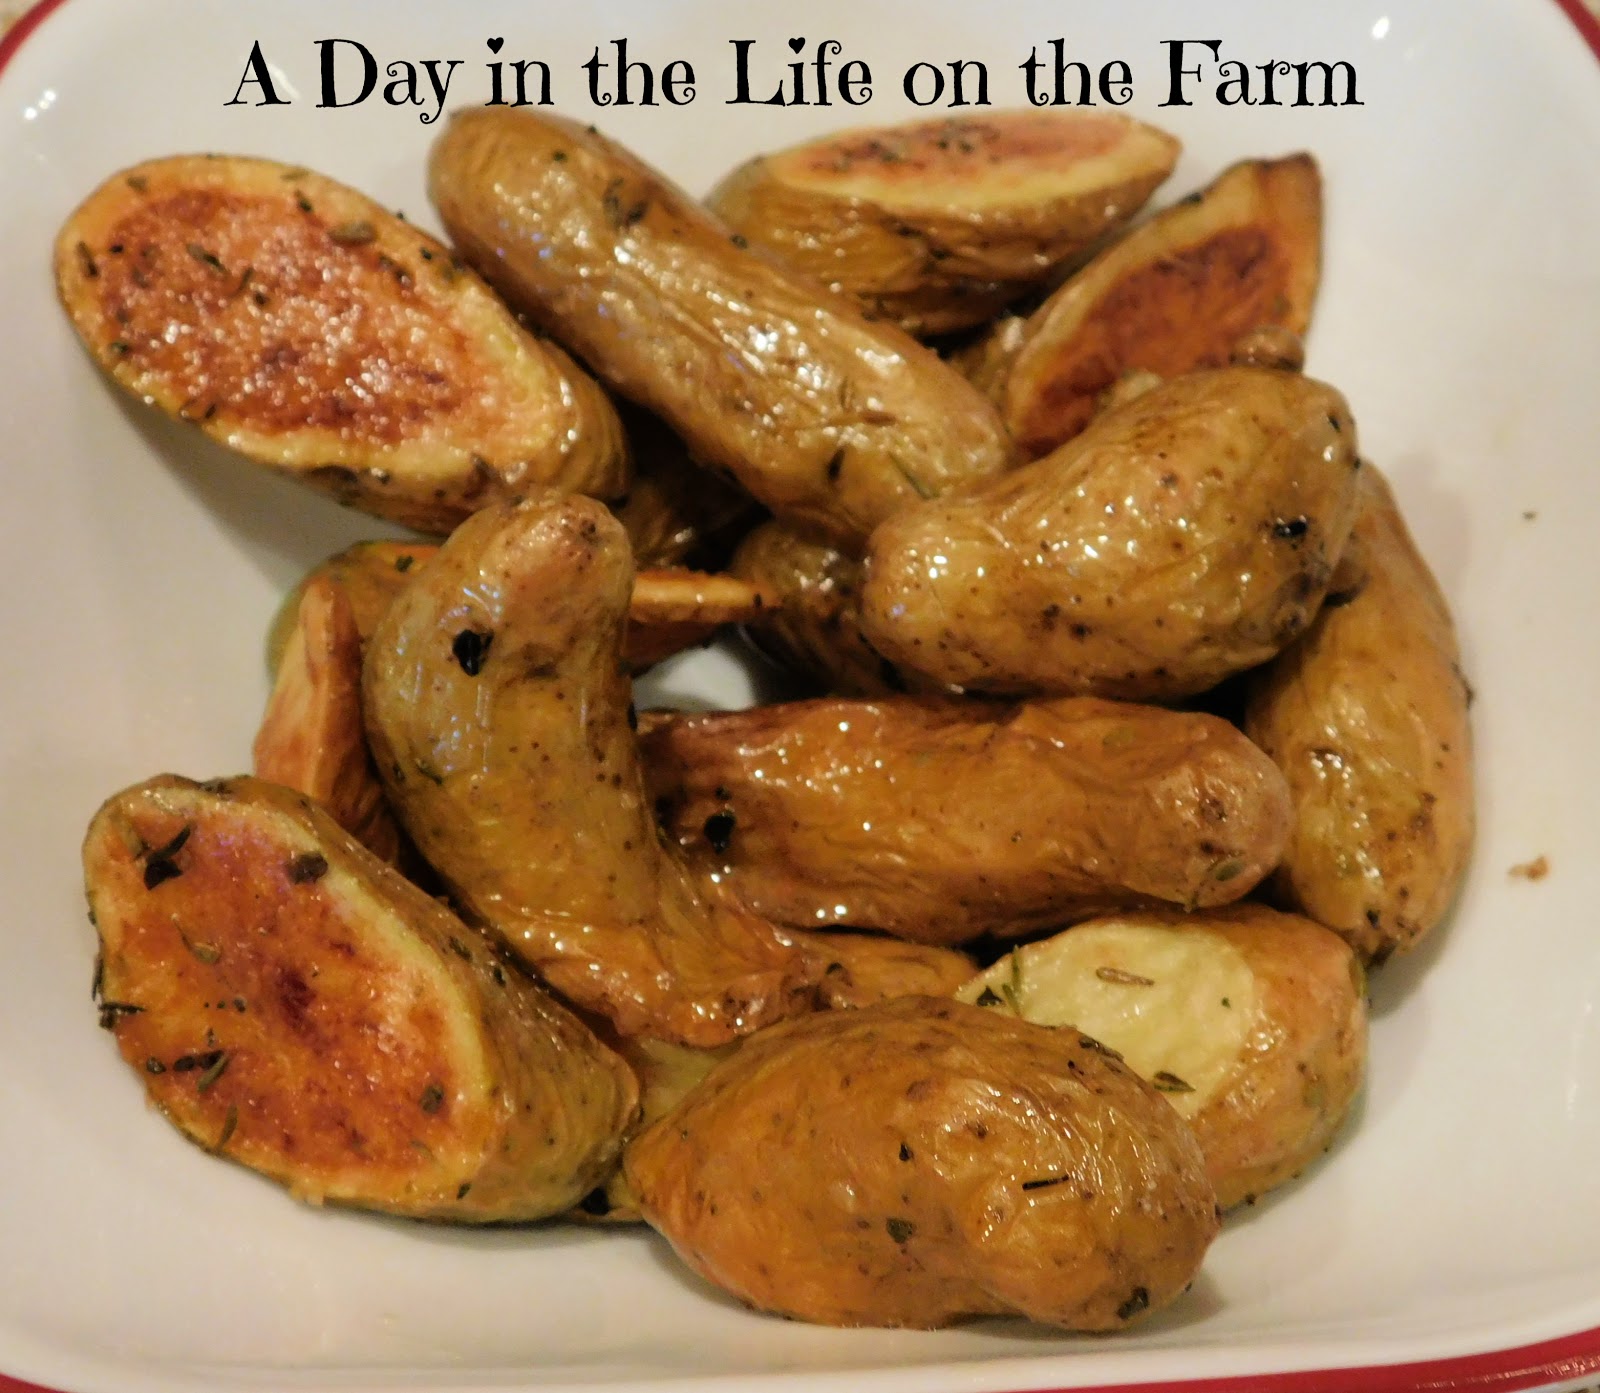 Roasted Fingerling Potatoes with Herbs de Provence